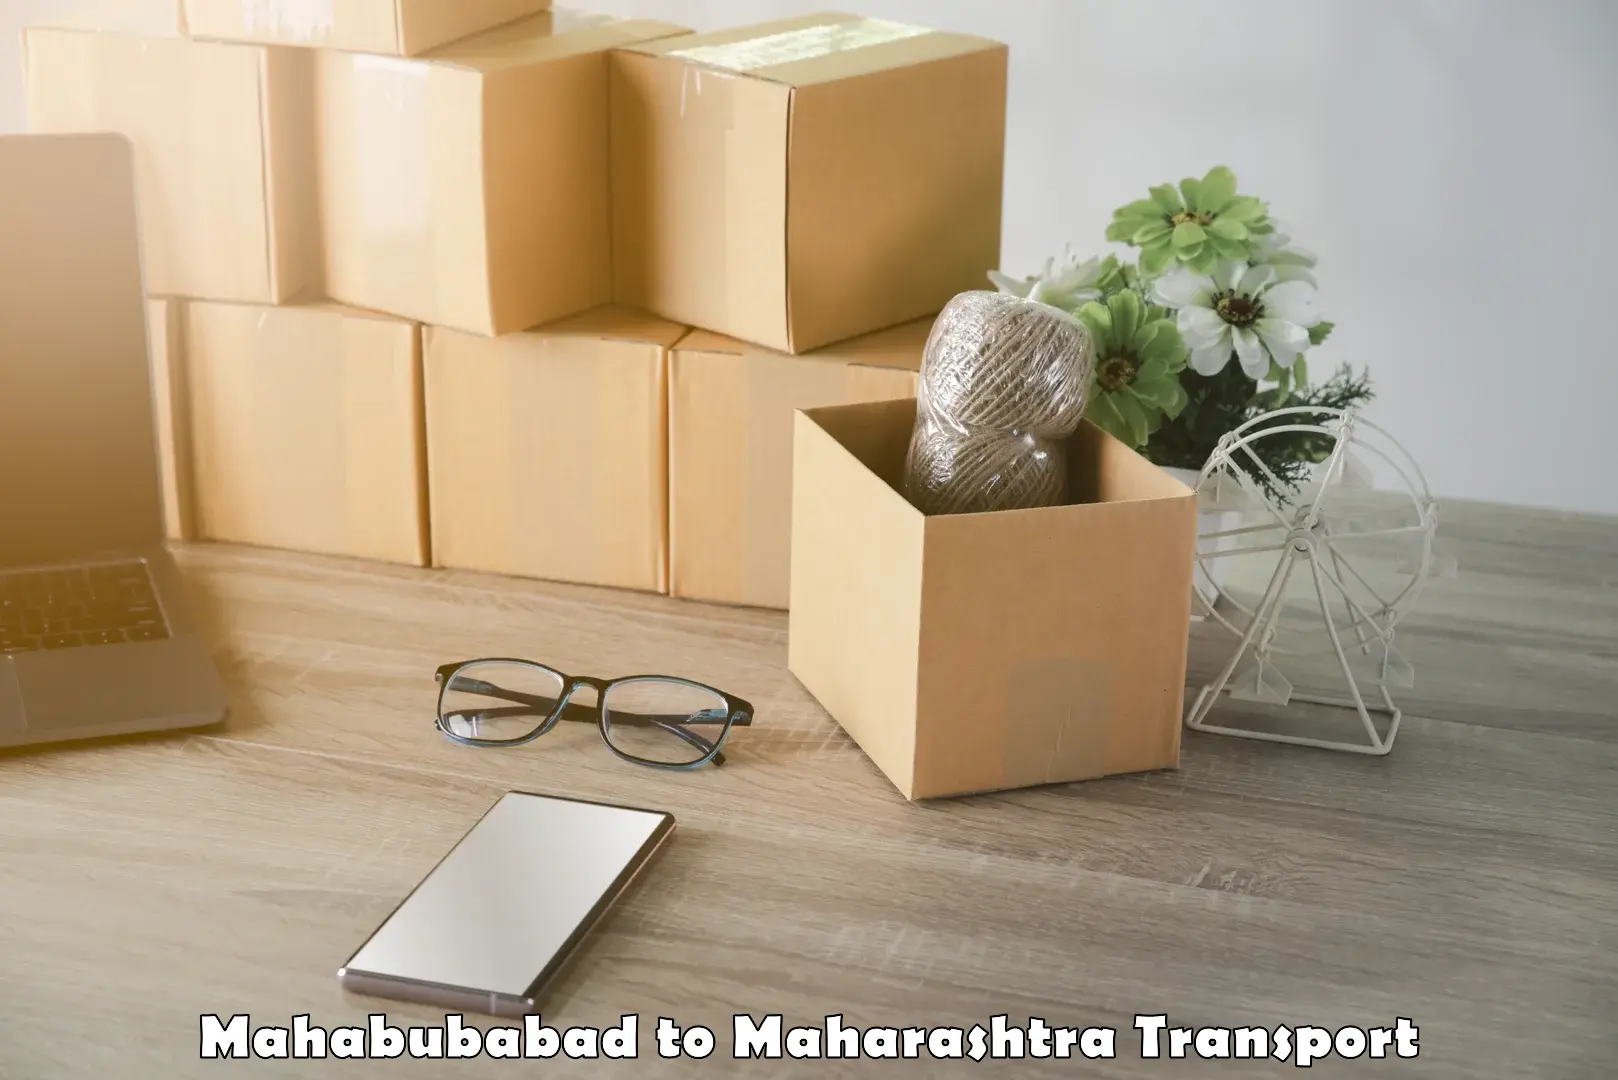 Truck transport companies in India Mahabubabad to Supe